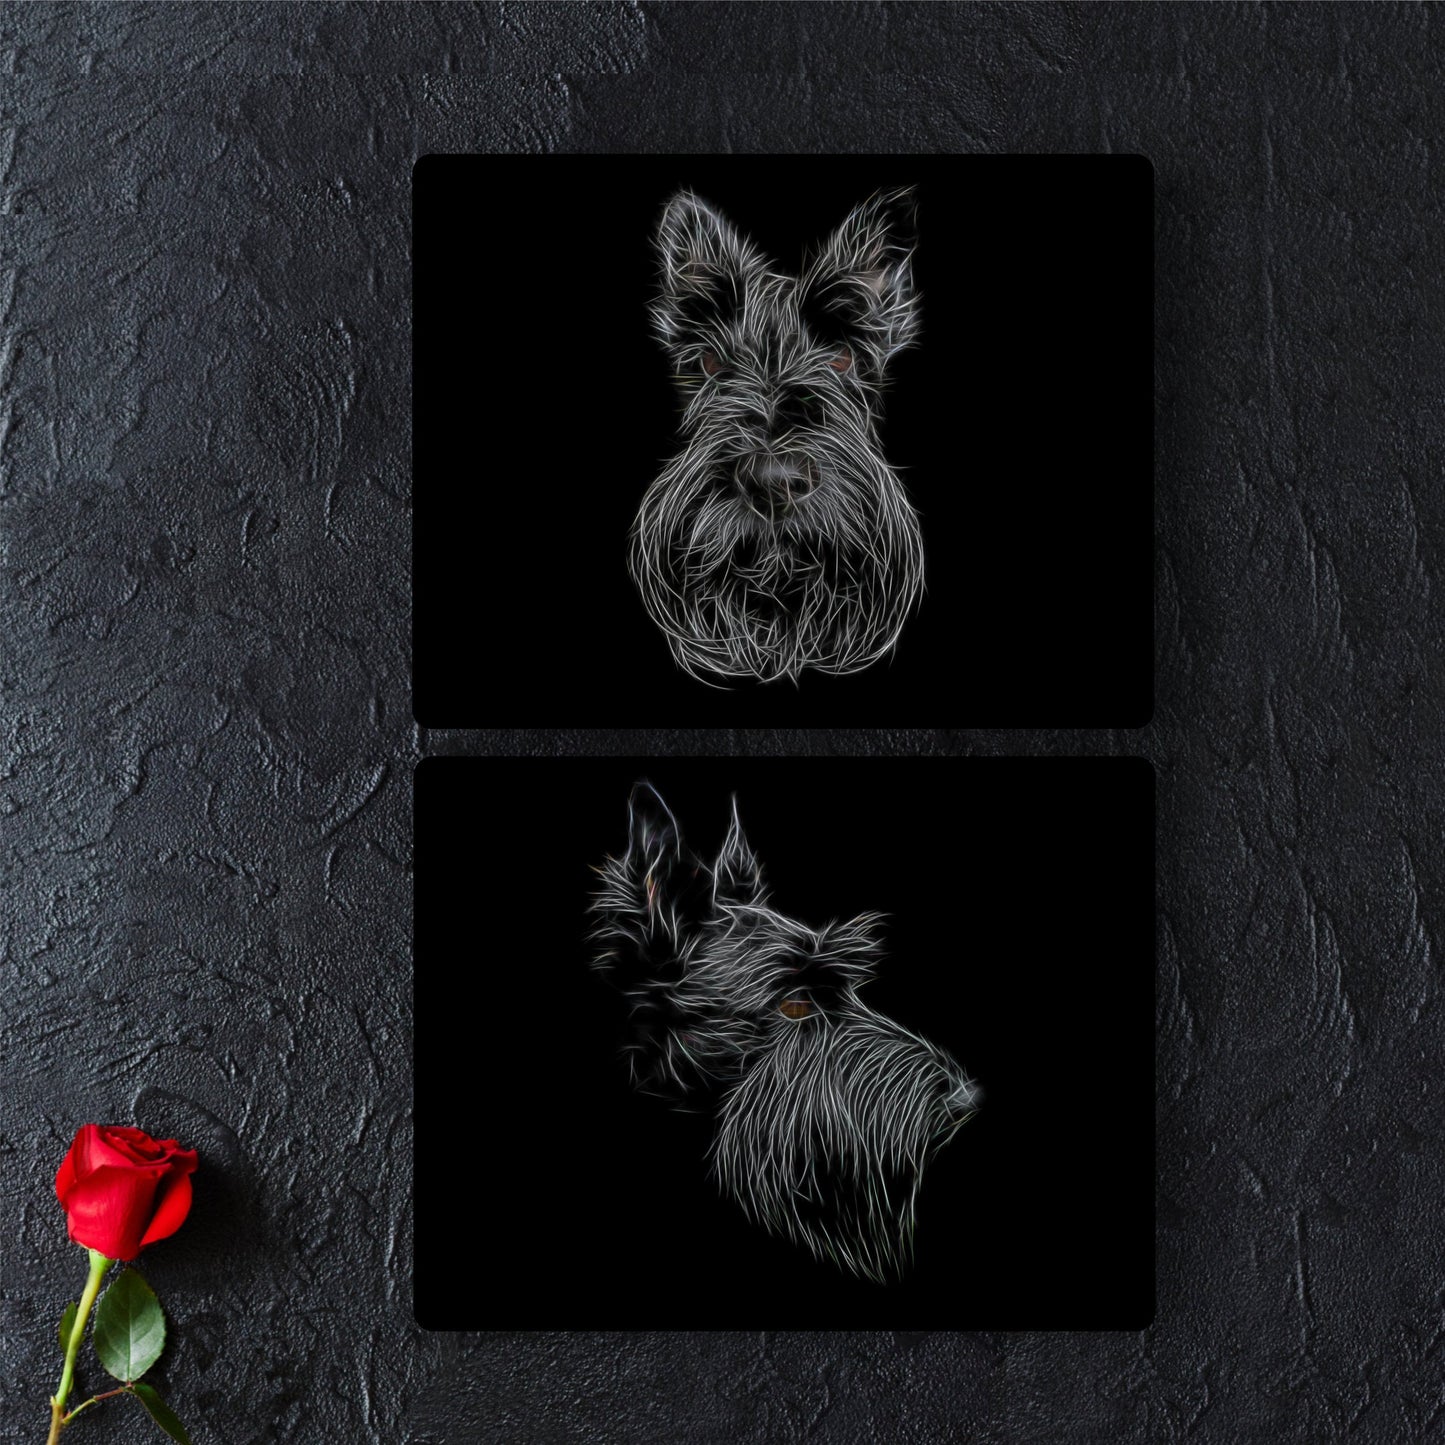 Scottish Terrier Placemats with Stunning Fractal Art Design. Set of Two.